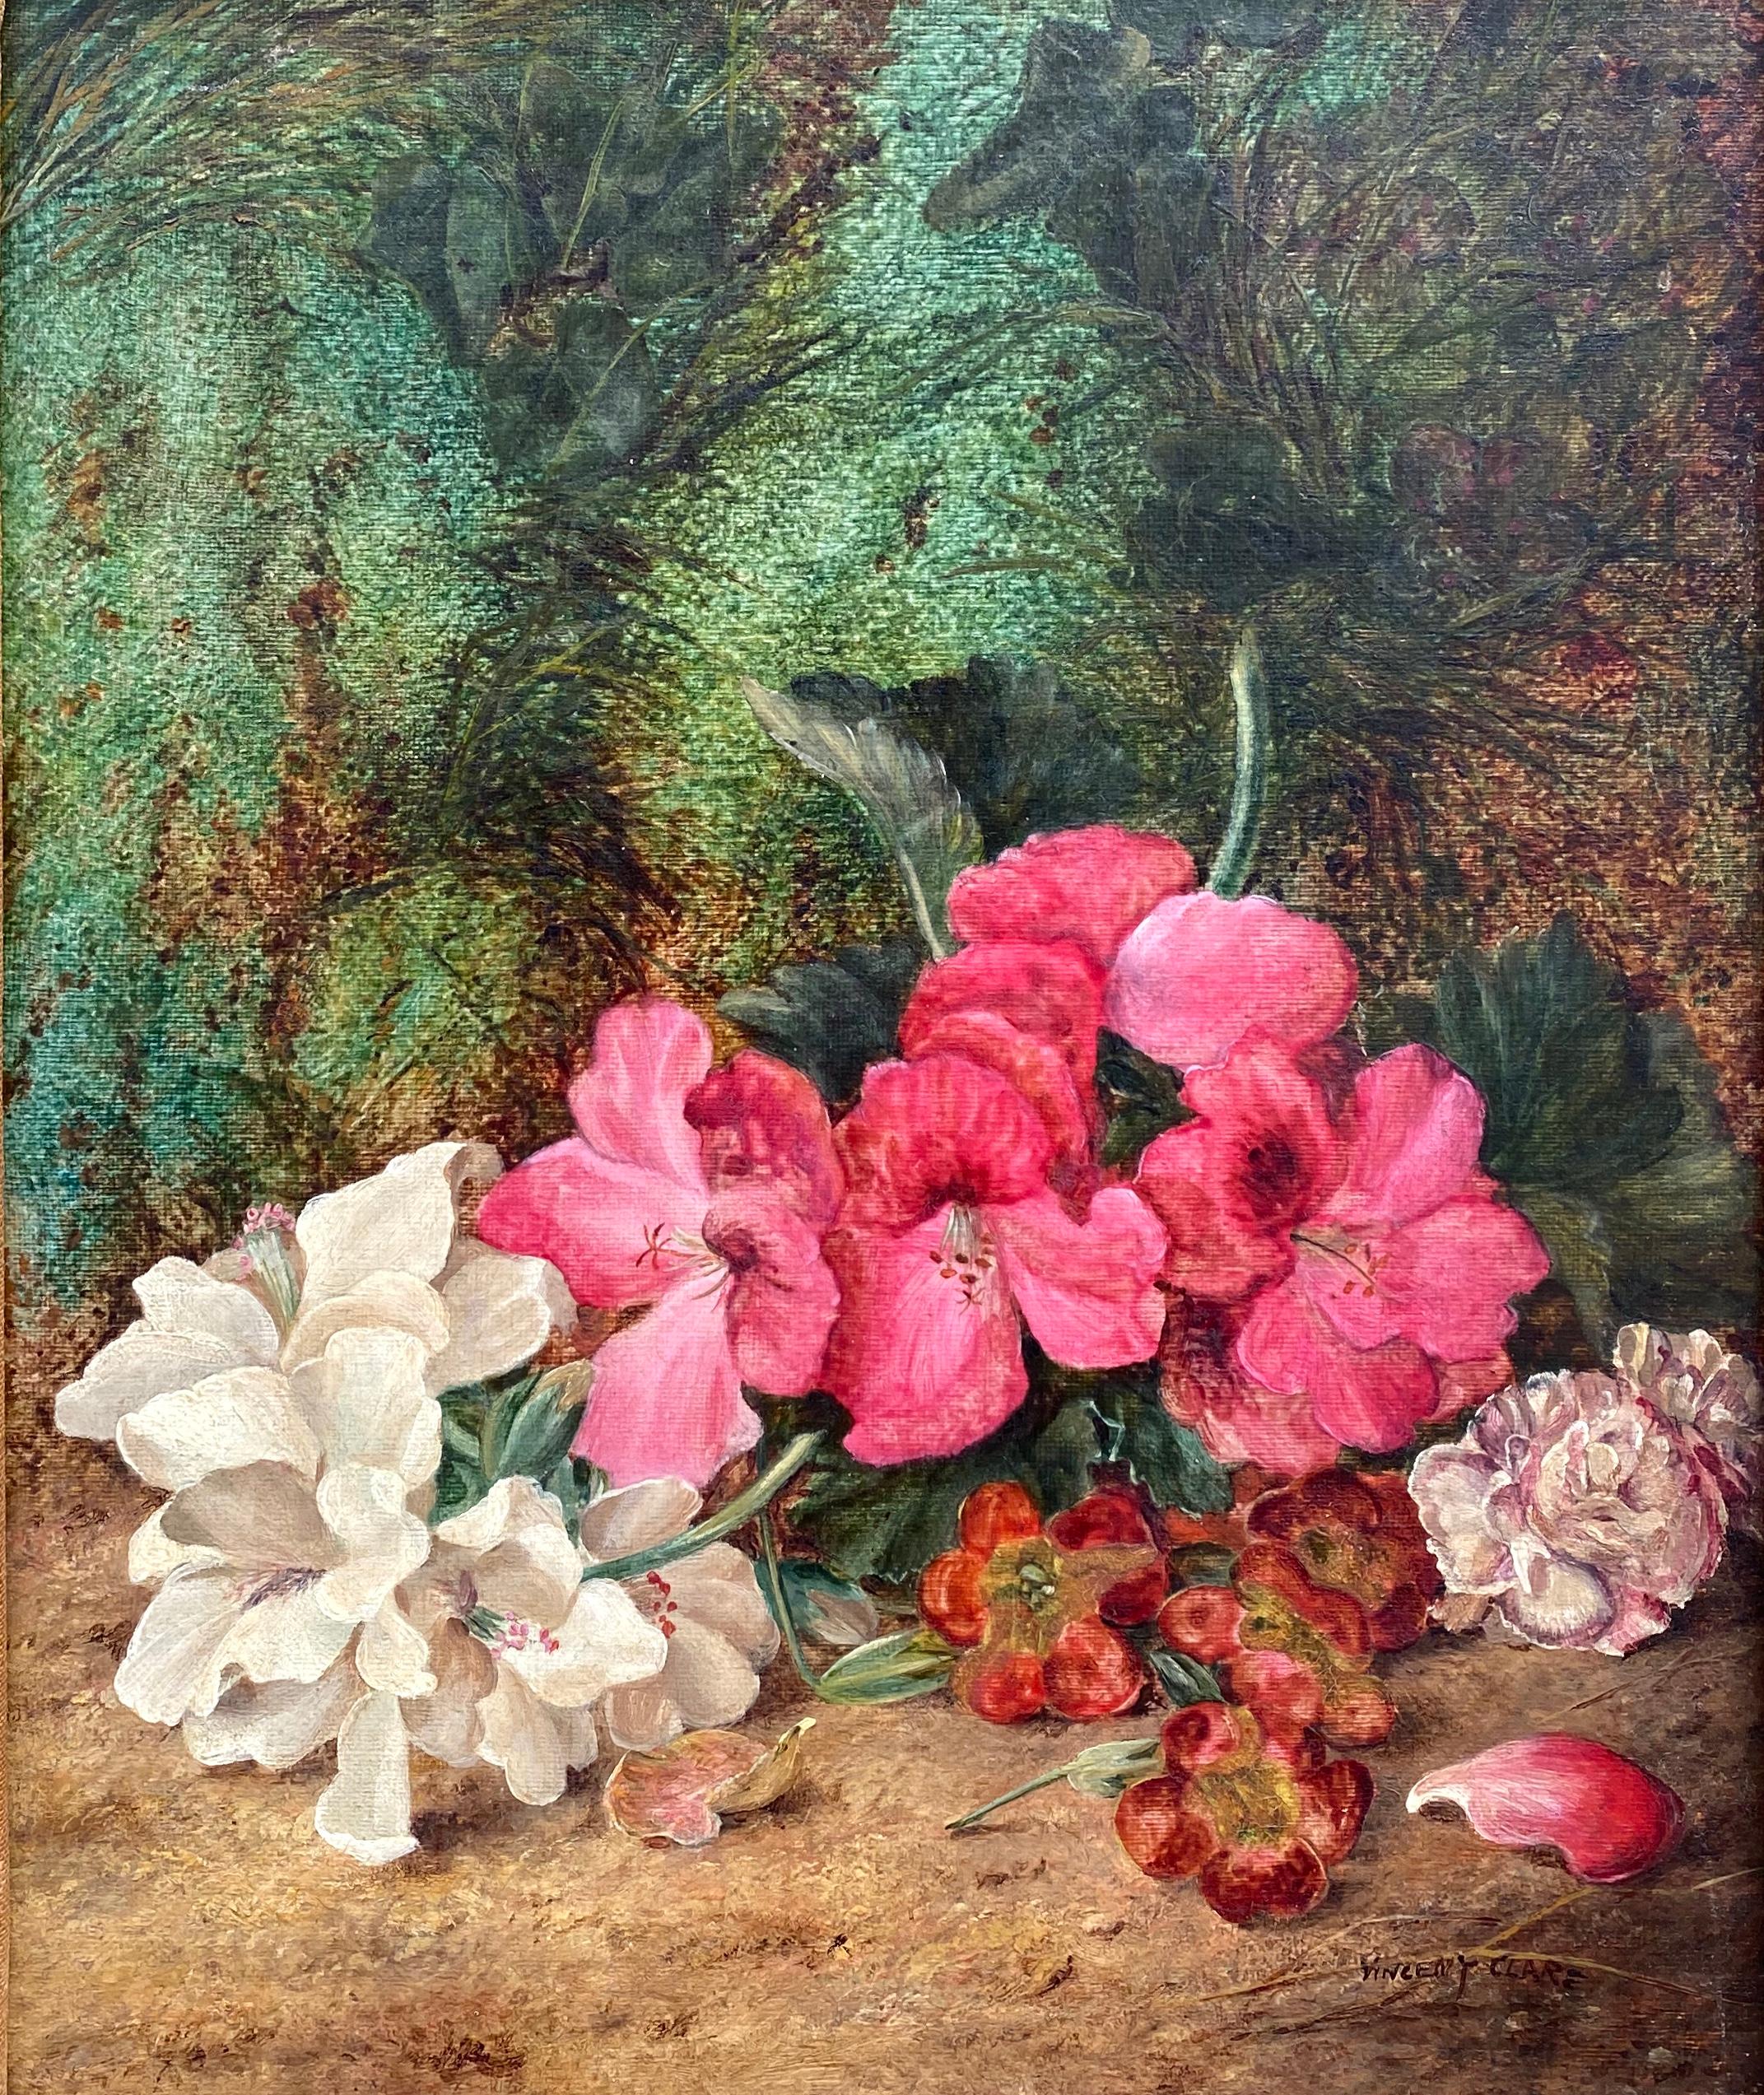 Vincent Clare Still-Life Painting - “Still Life with Flowers”